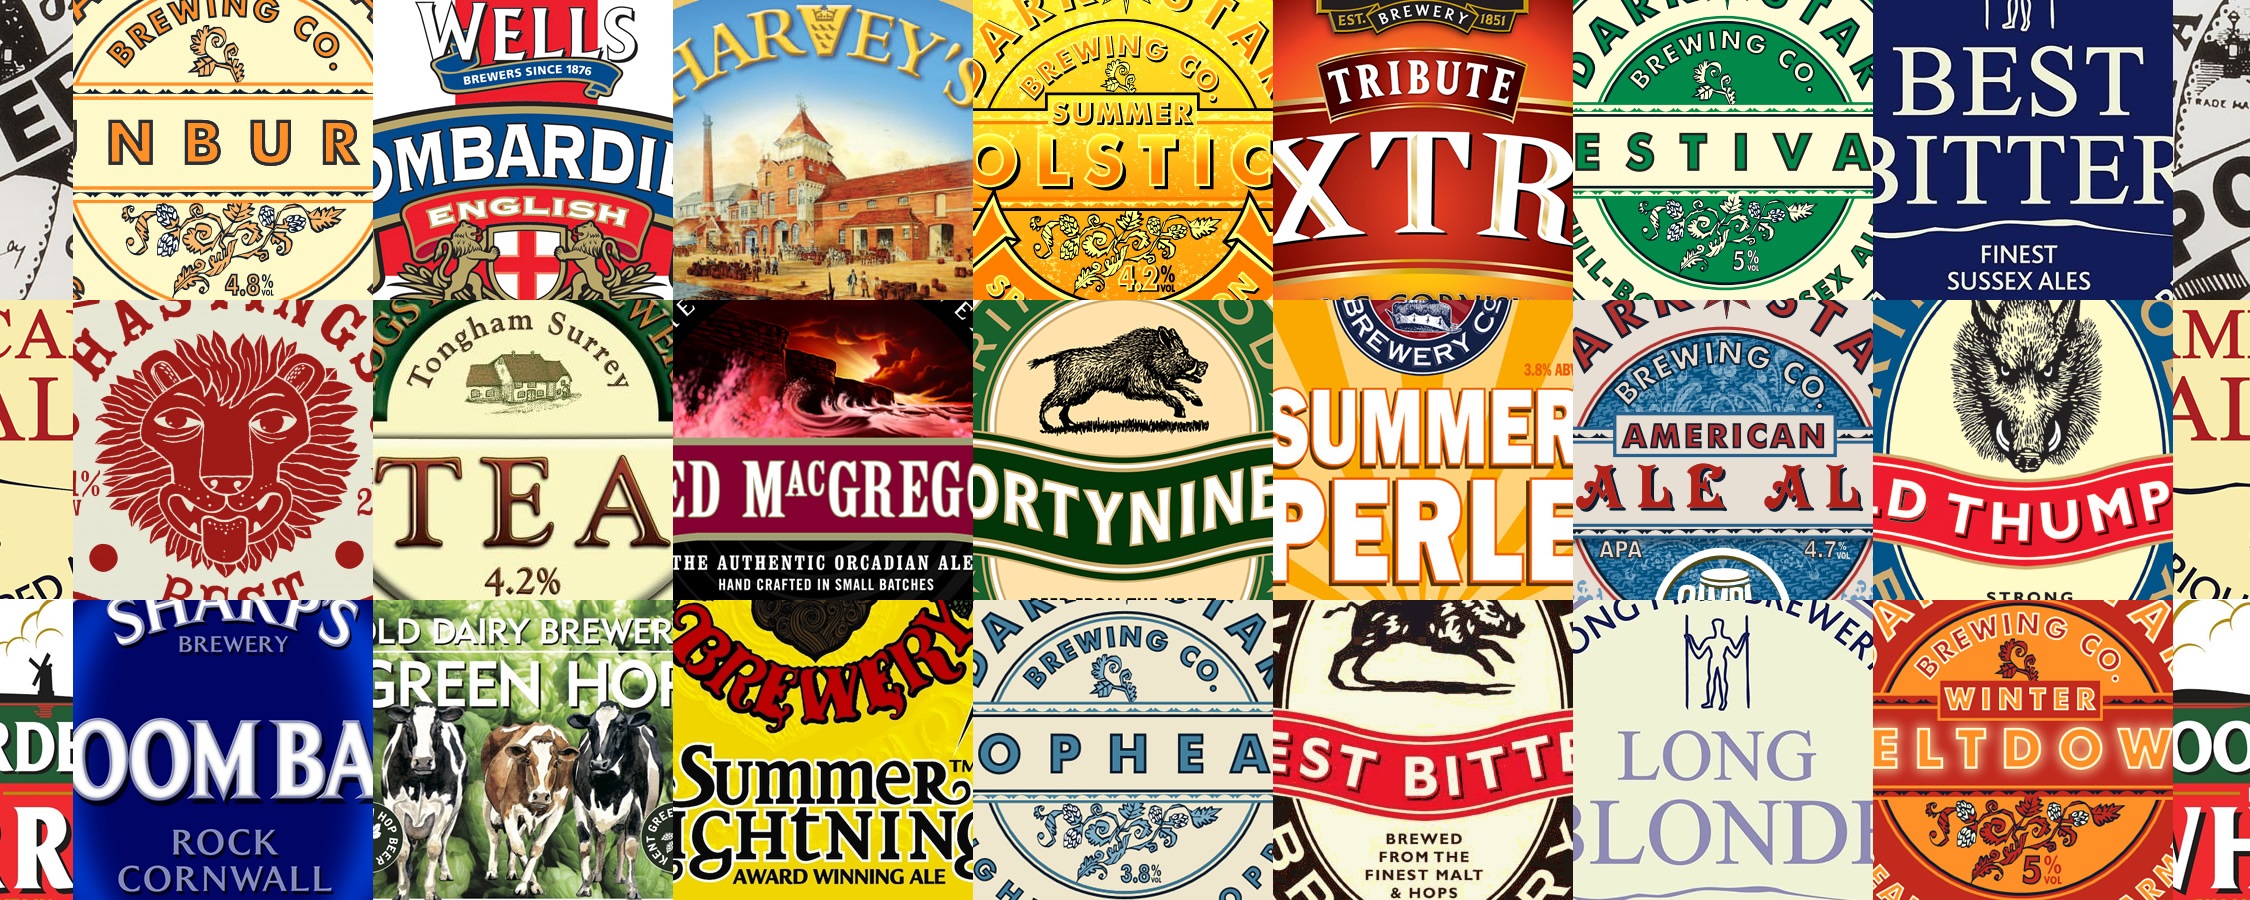 Guest Ales - We regularly have guest ales throughout the year